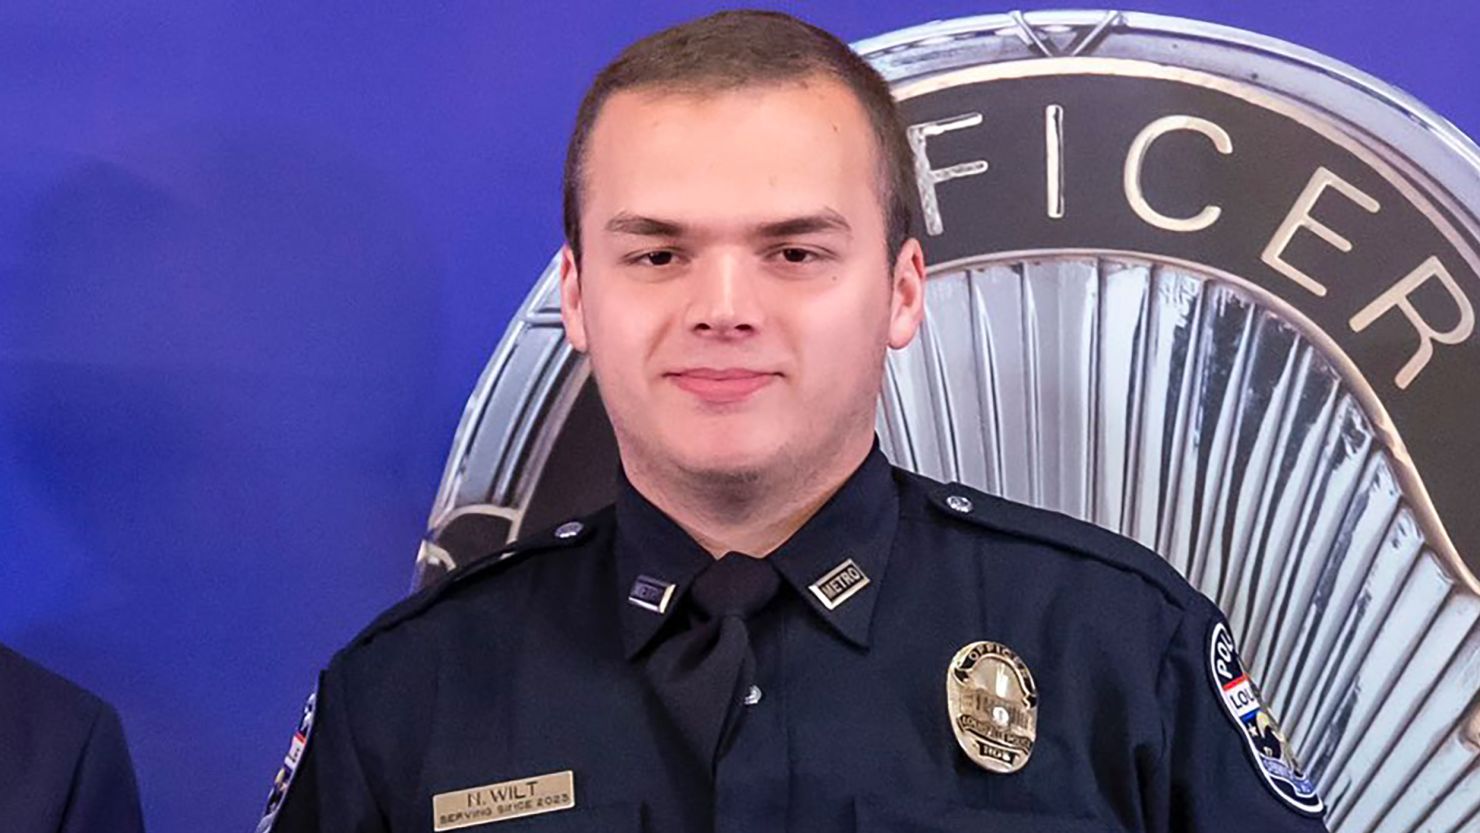 Louisville Metro Police Department Officer Nickolas Wilt, 26, was taken to the hospital and had brain surgery after he was shot in the head during a mass shooting at a bank.